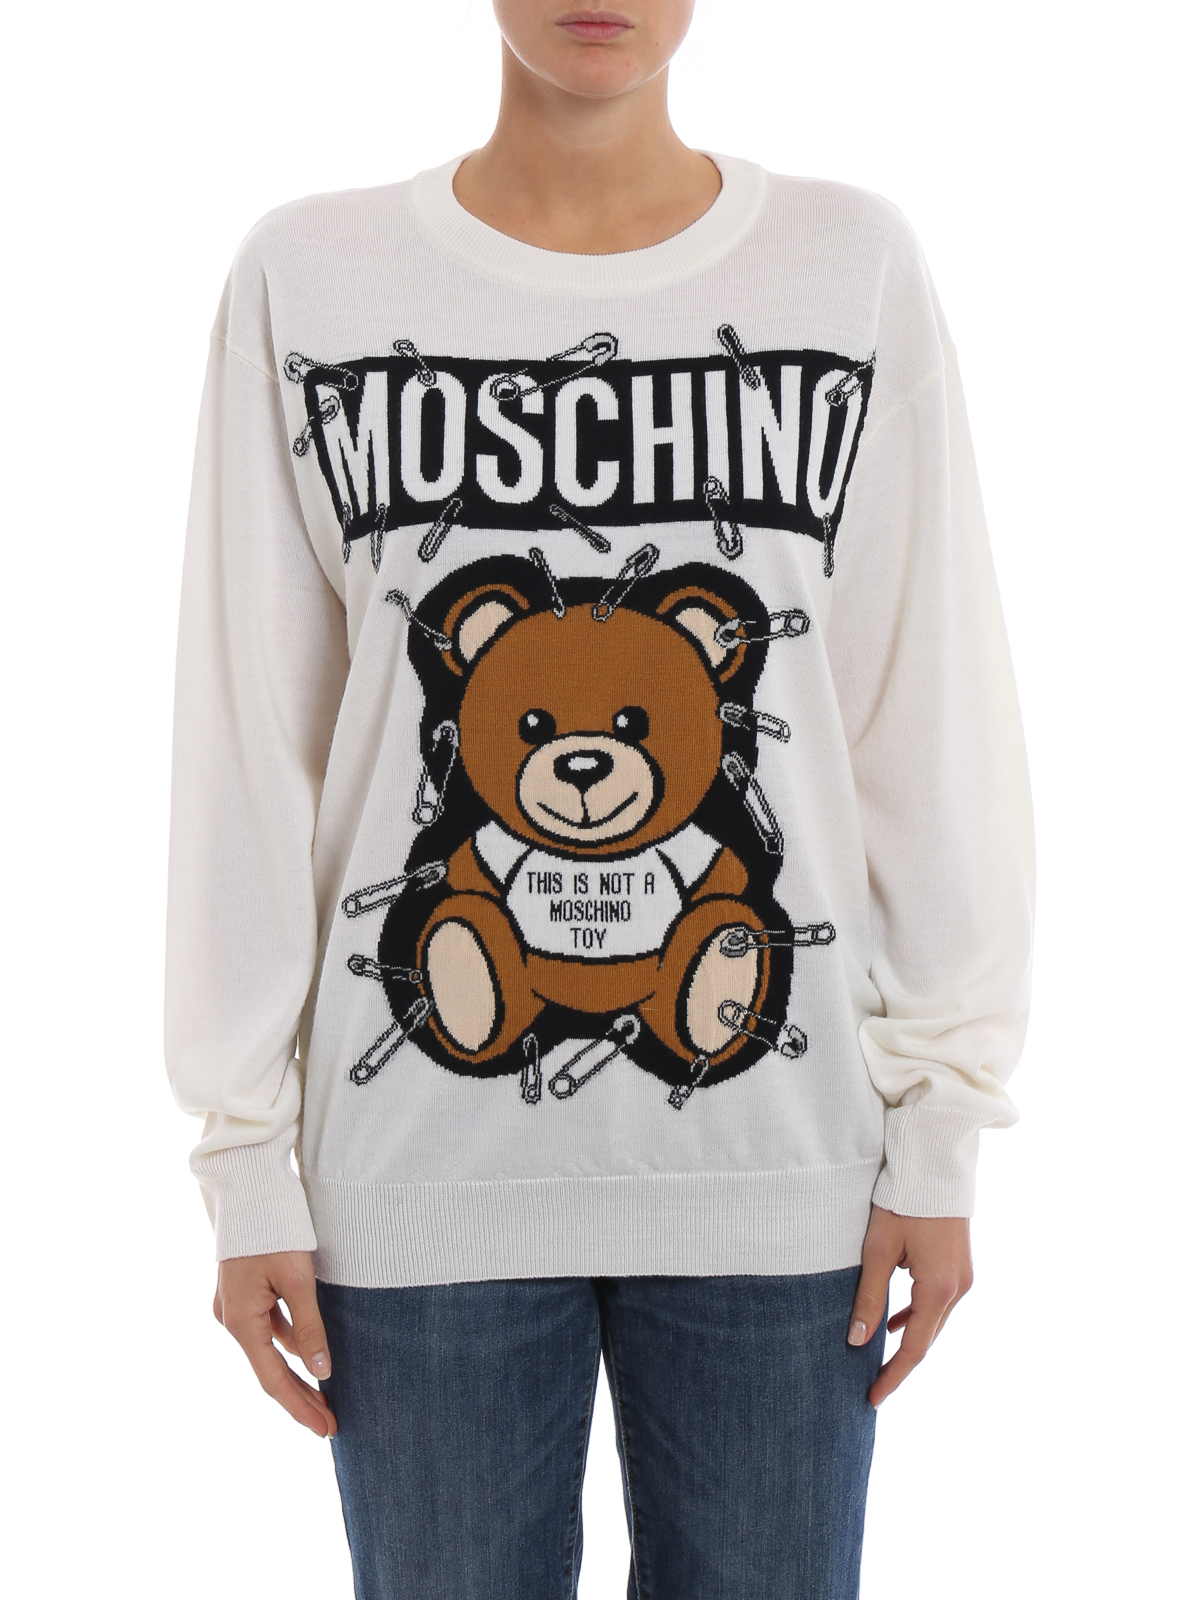 This is not a Moschino Toy wool sweater 